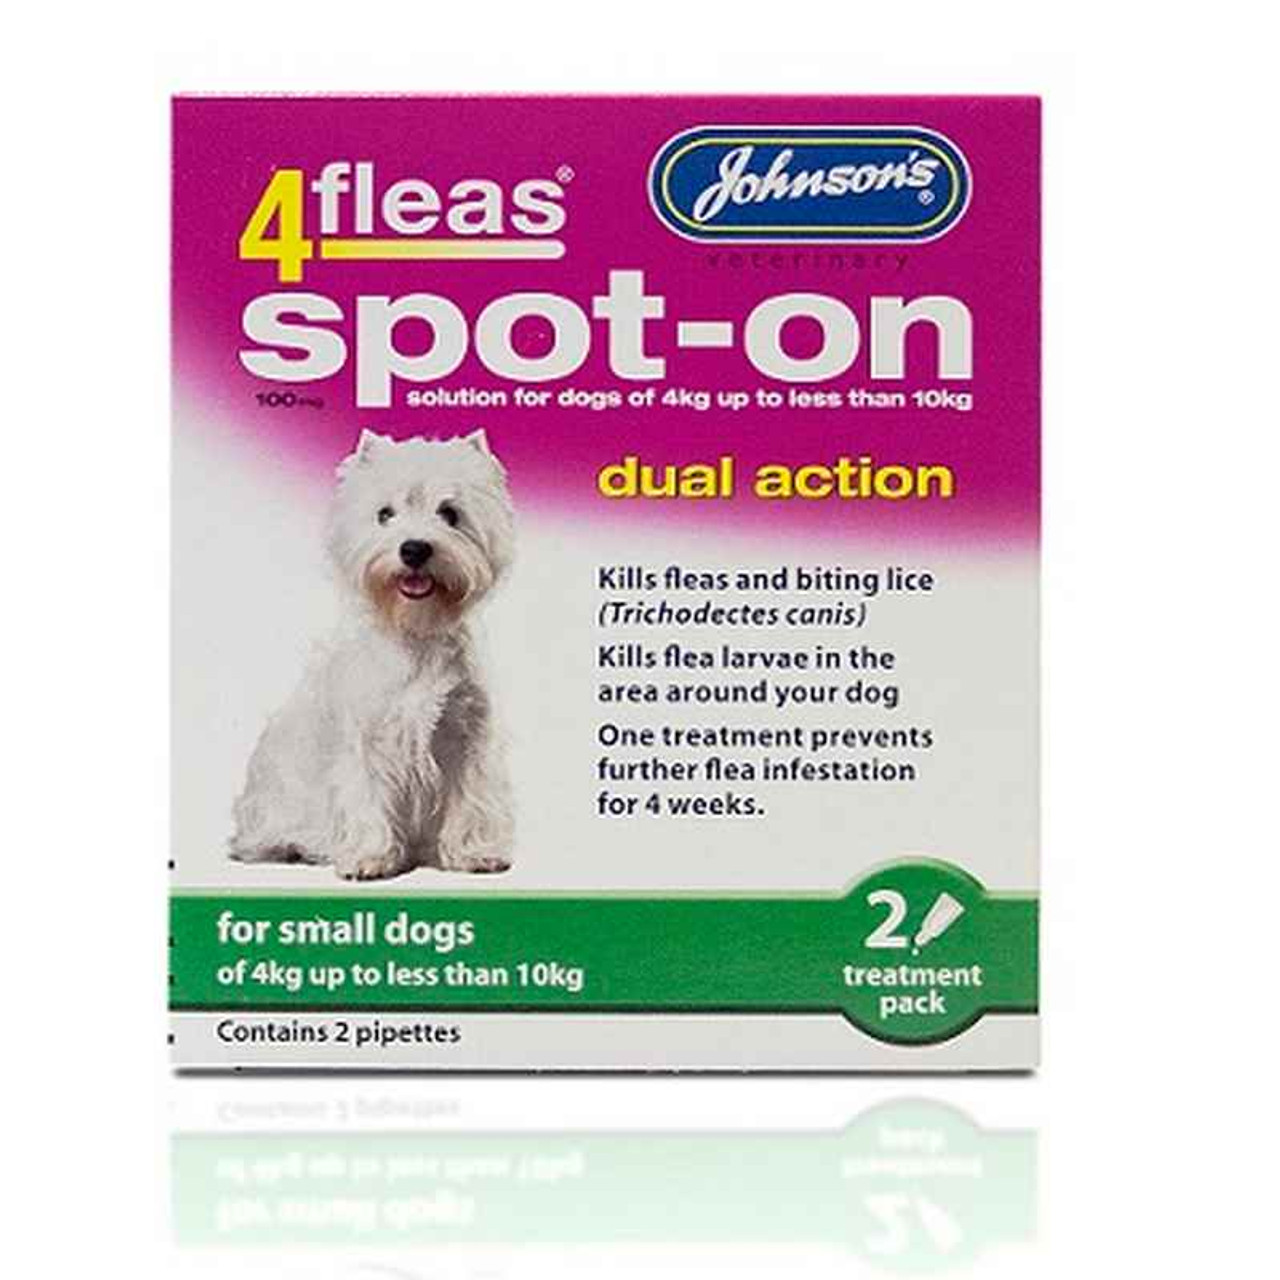 Johnsons Veterinary Products 4Fleas Spot-On for Dogs